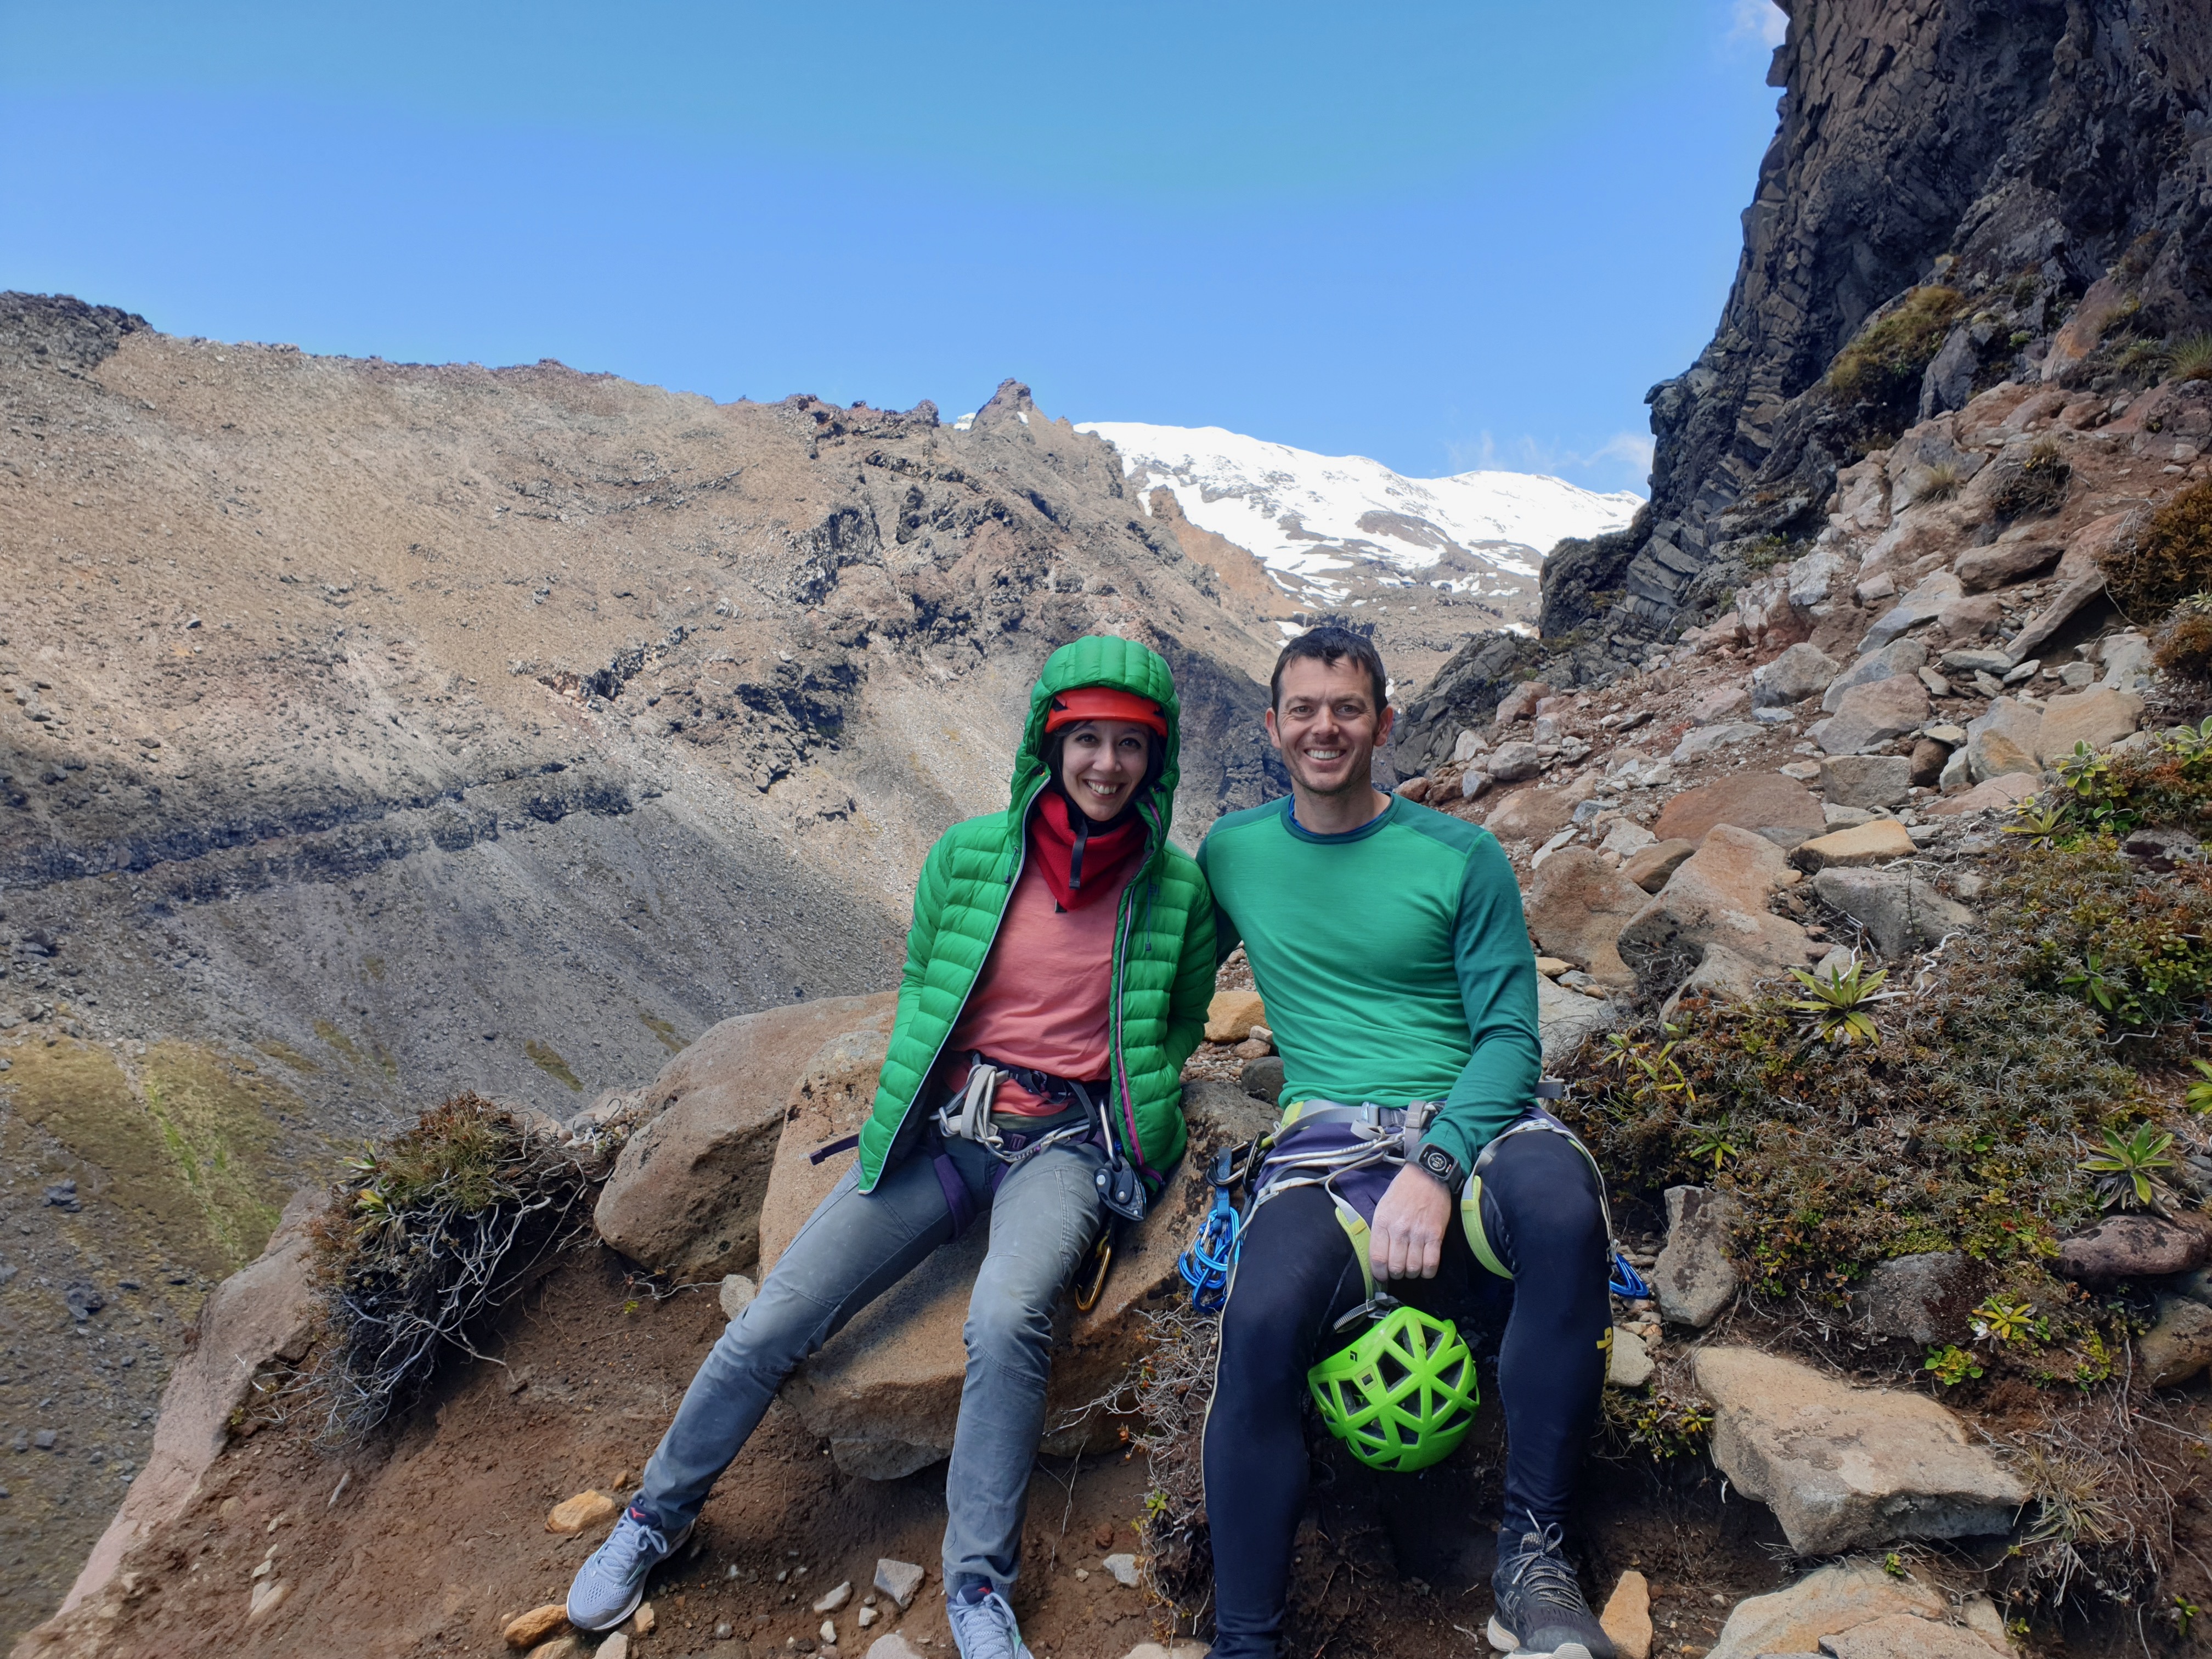 Our first visit to Whakapapa Gorge crag and we love it!